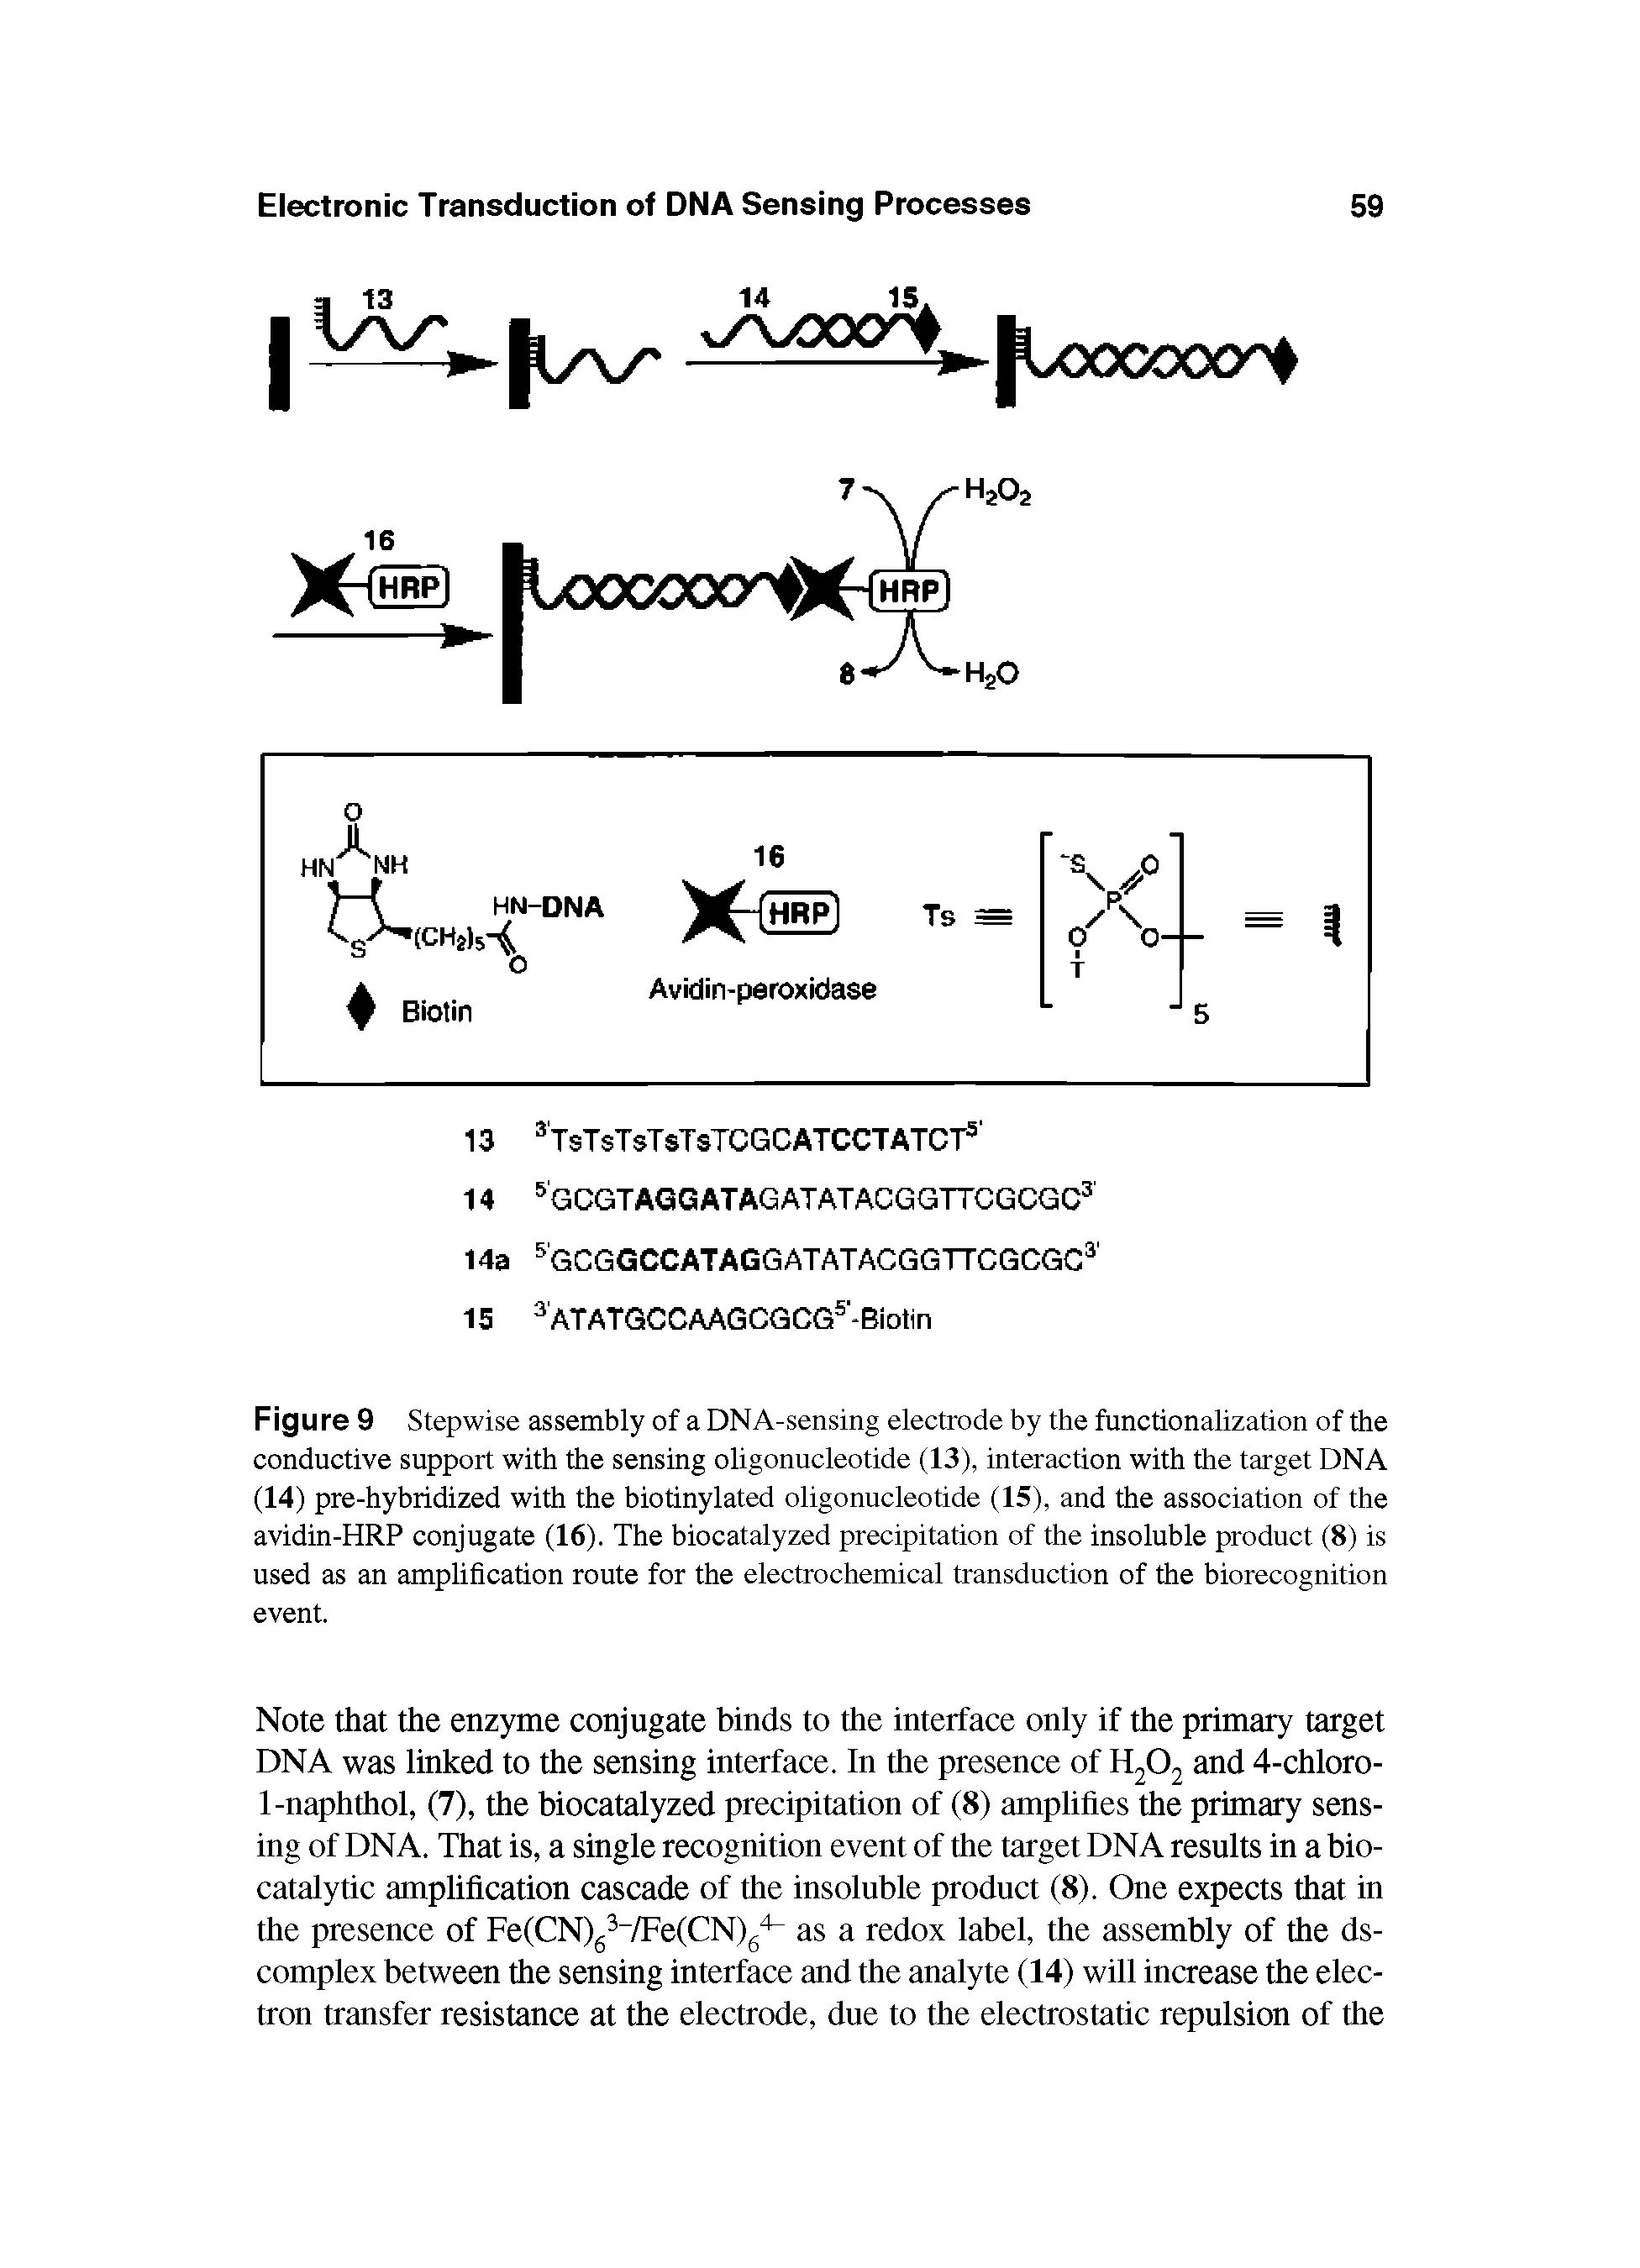 Figure 9 Stepwise assembly of a DNA-sensing electrode by the functionalization of the conductive support with the sensing oligonucleotide (13), interaction with the target DNA (14) pre-hybridized with the biotinylated oligonucleotide (15), and the association of the avidin-HRP conjugate (16). The biocatalyzed precipitation of the insoluble product (8) is used as an amplification route for the electrochemical transduction of the biorecognition event.